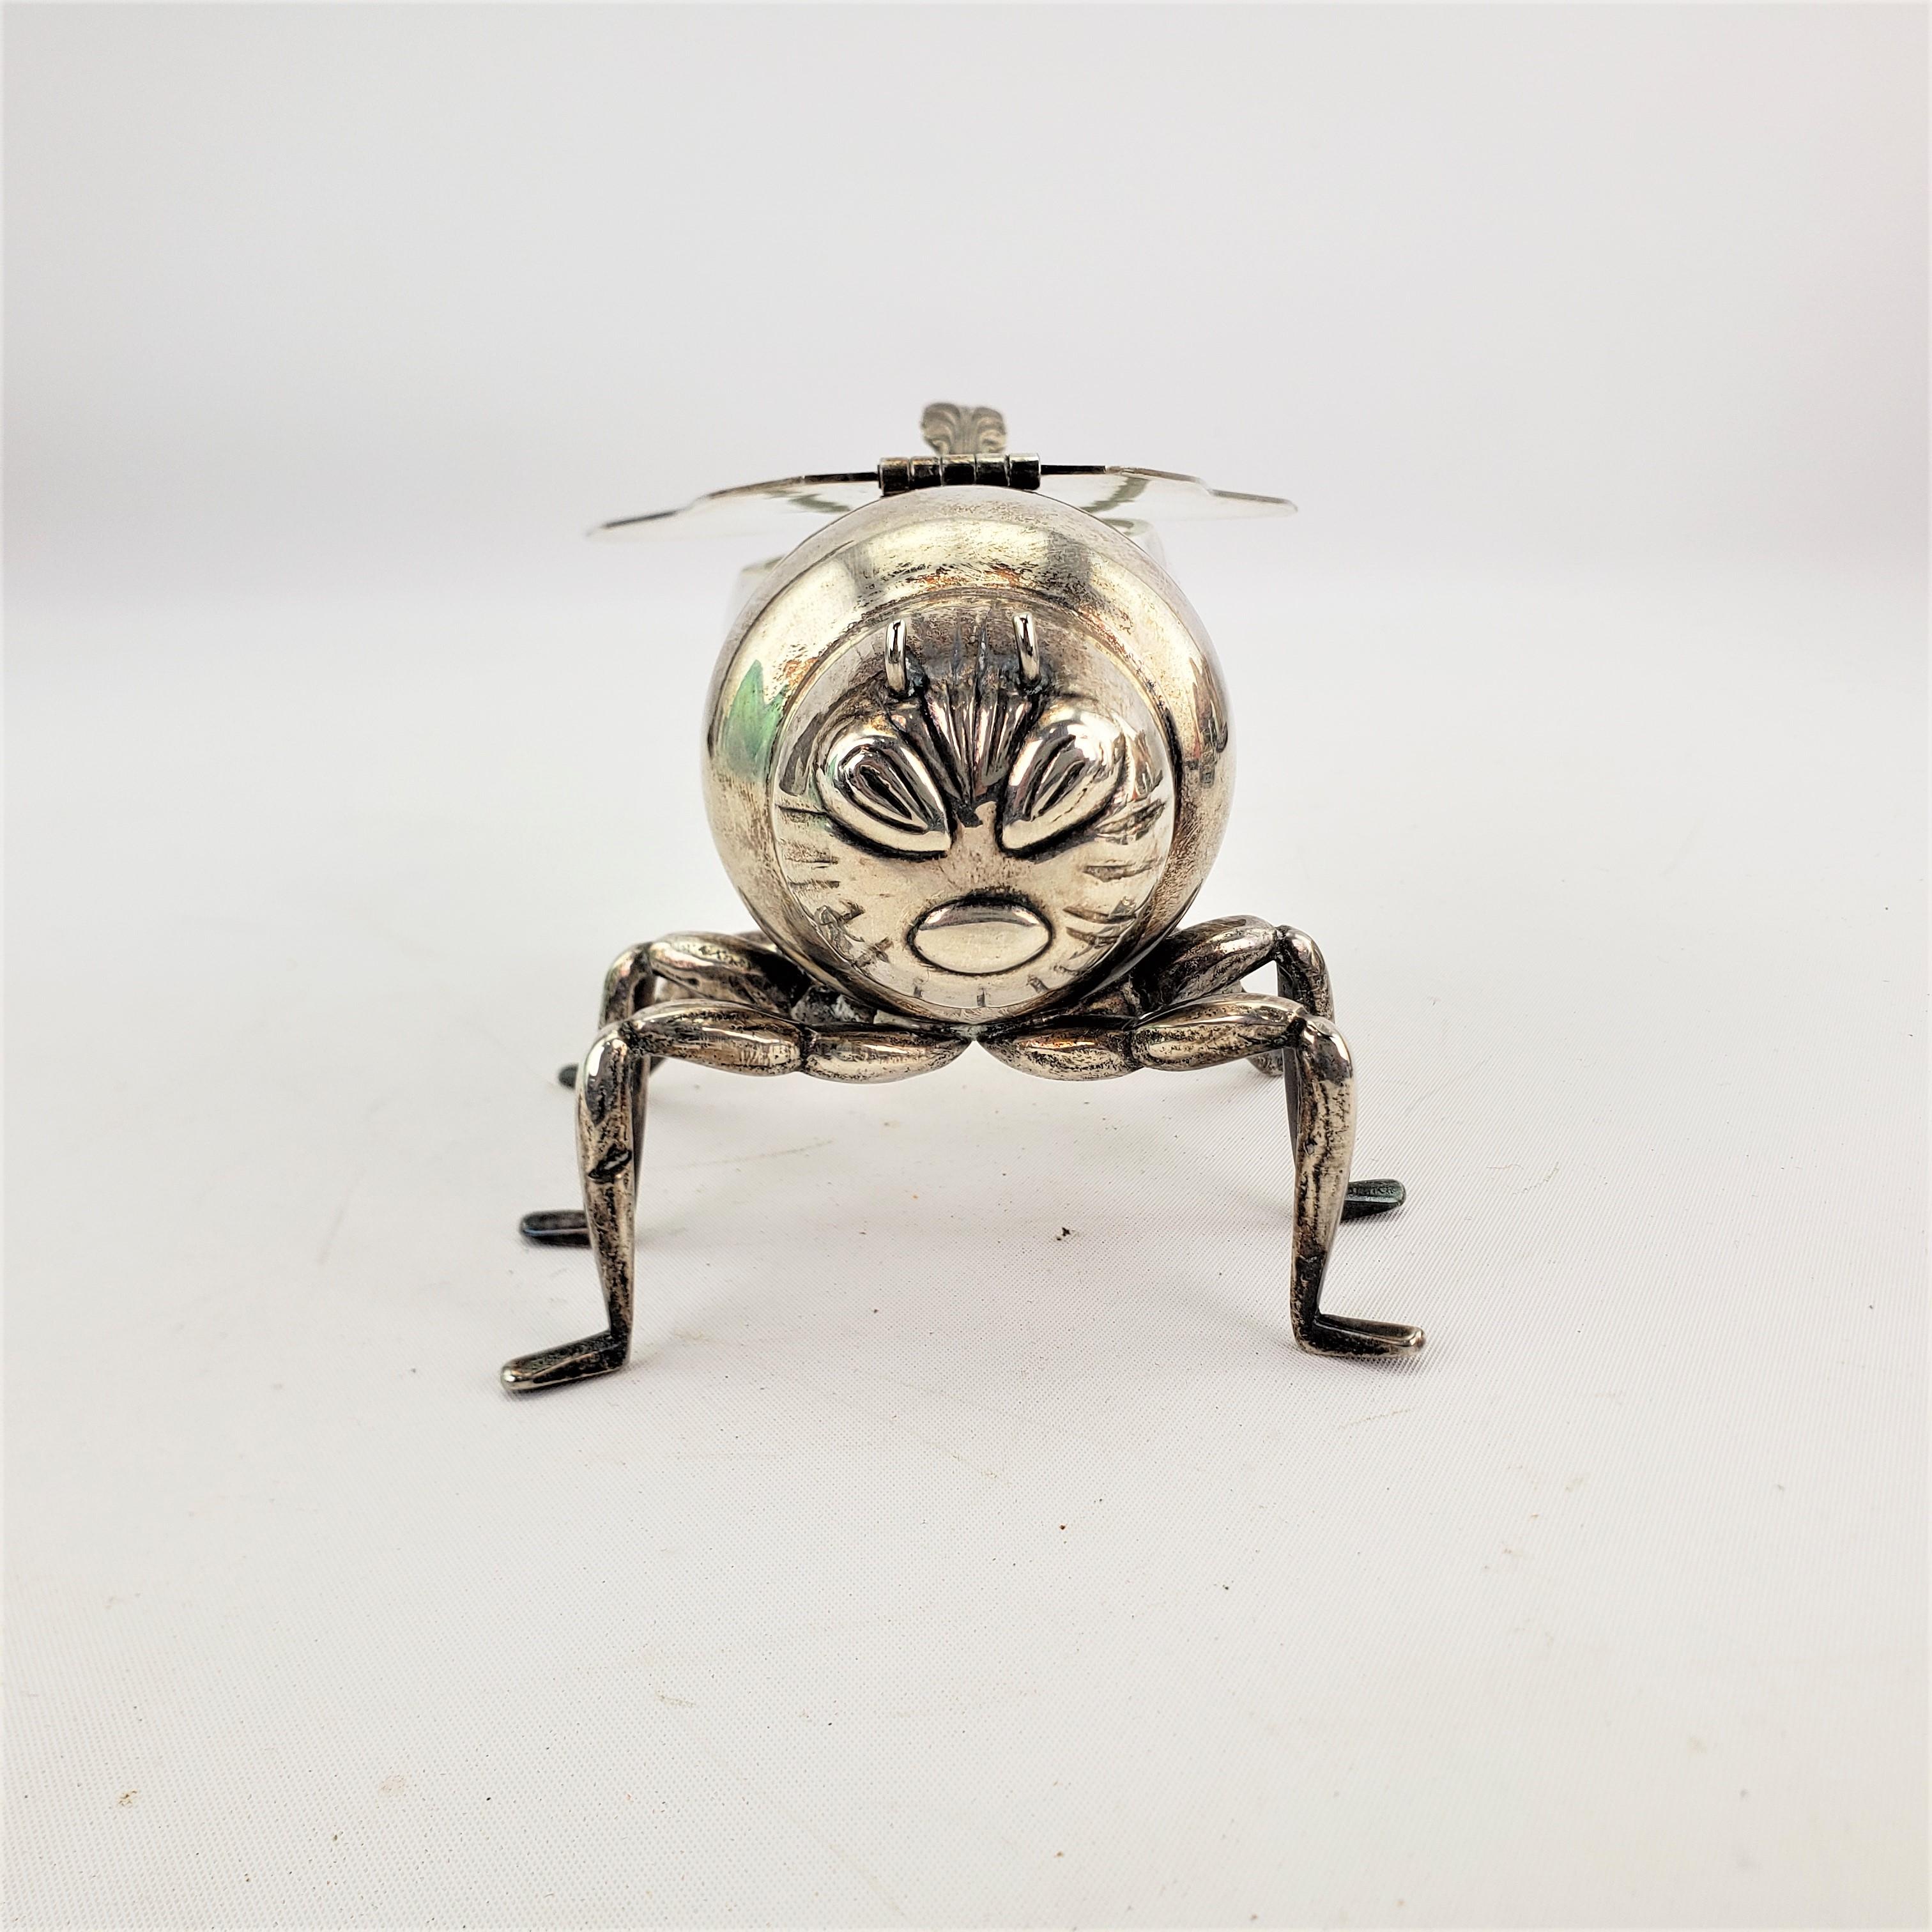 Machine-Made Antique English Silver Plated & Glass Figural Bee or Wasp Condiment or Honey Pot